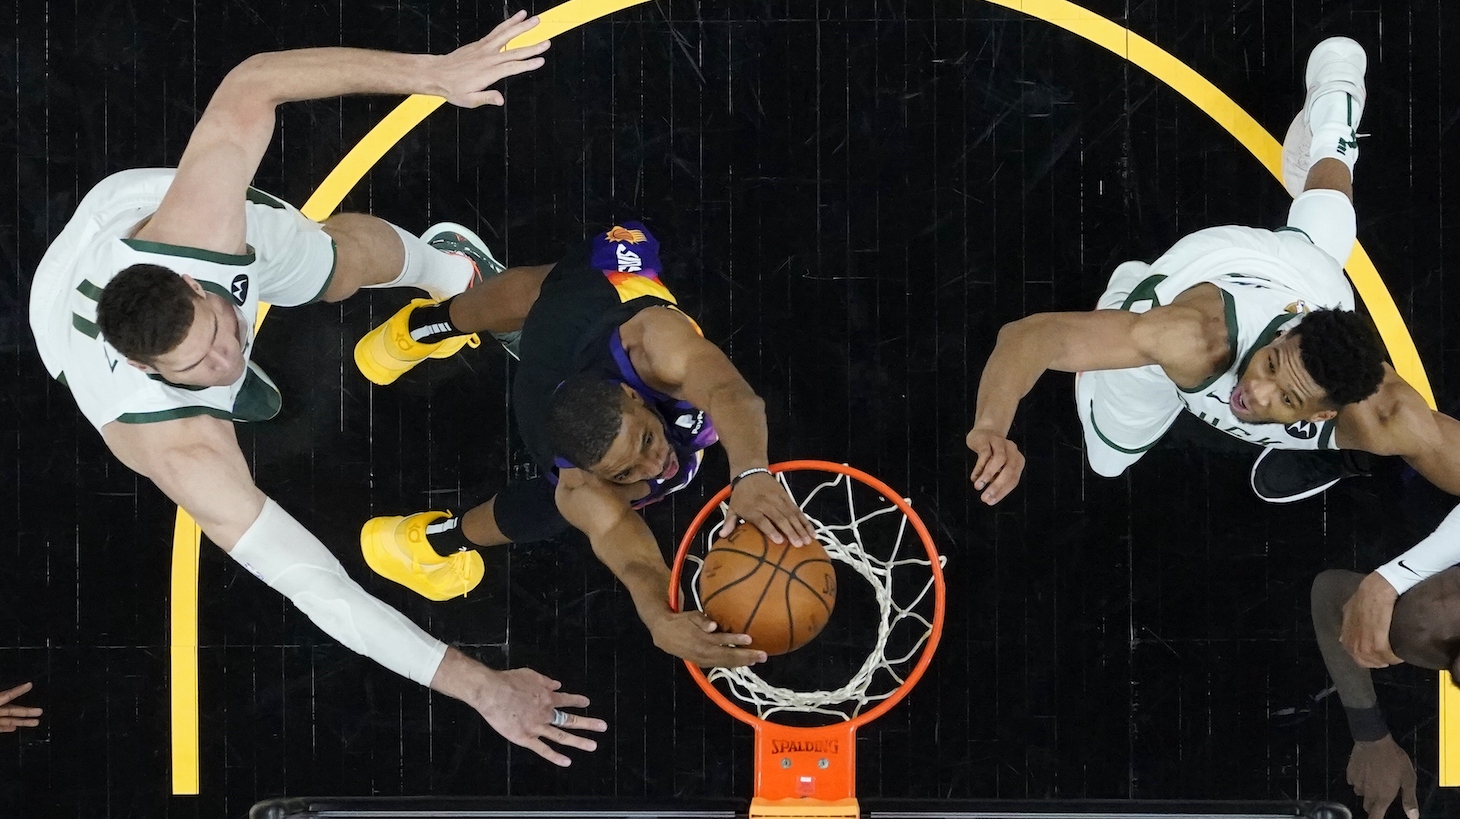 PHOENIX, ARIZONA - JULY 08: Phoenix Suns forward Mikal Bridges, middle, dunks against Milwaukee Bucks center Brook Lopez, left, and Bucks forward Giannis Antetokounmpo, right, during the second half of Game Two of the NBA Finals at Phoenix Suns Arena on July 08, 2021 in Phoenix, Arizona. NOTE TO USER: User expressly acknowledges and agrees that, by downloading and or using this photograph, User is consenting to the terms and conditions of the Getty Images License Agreement. (Photo by Ross D. Franklin-Pool/Getty Images )